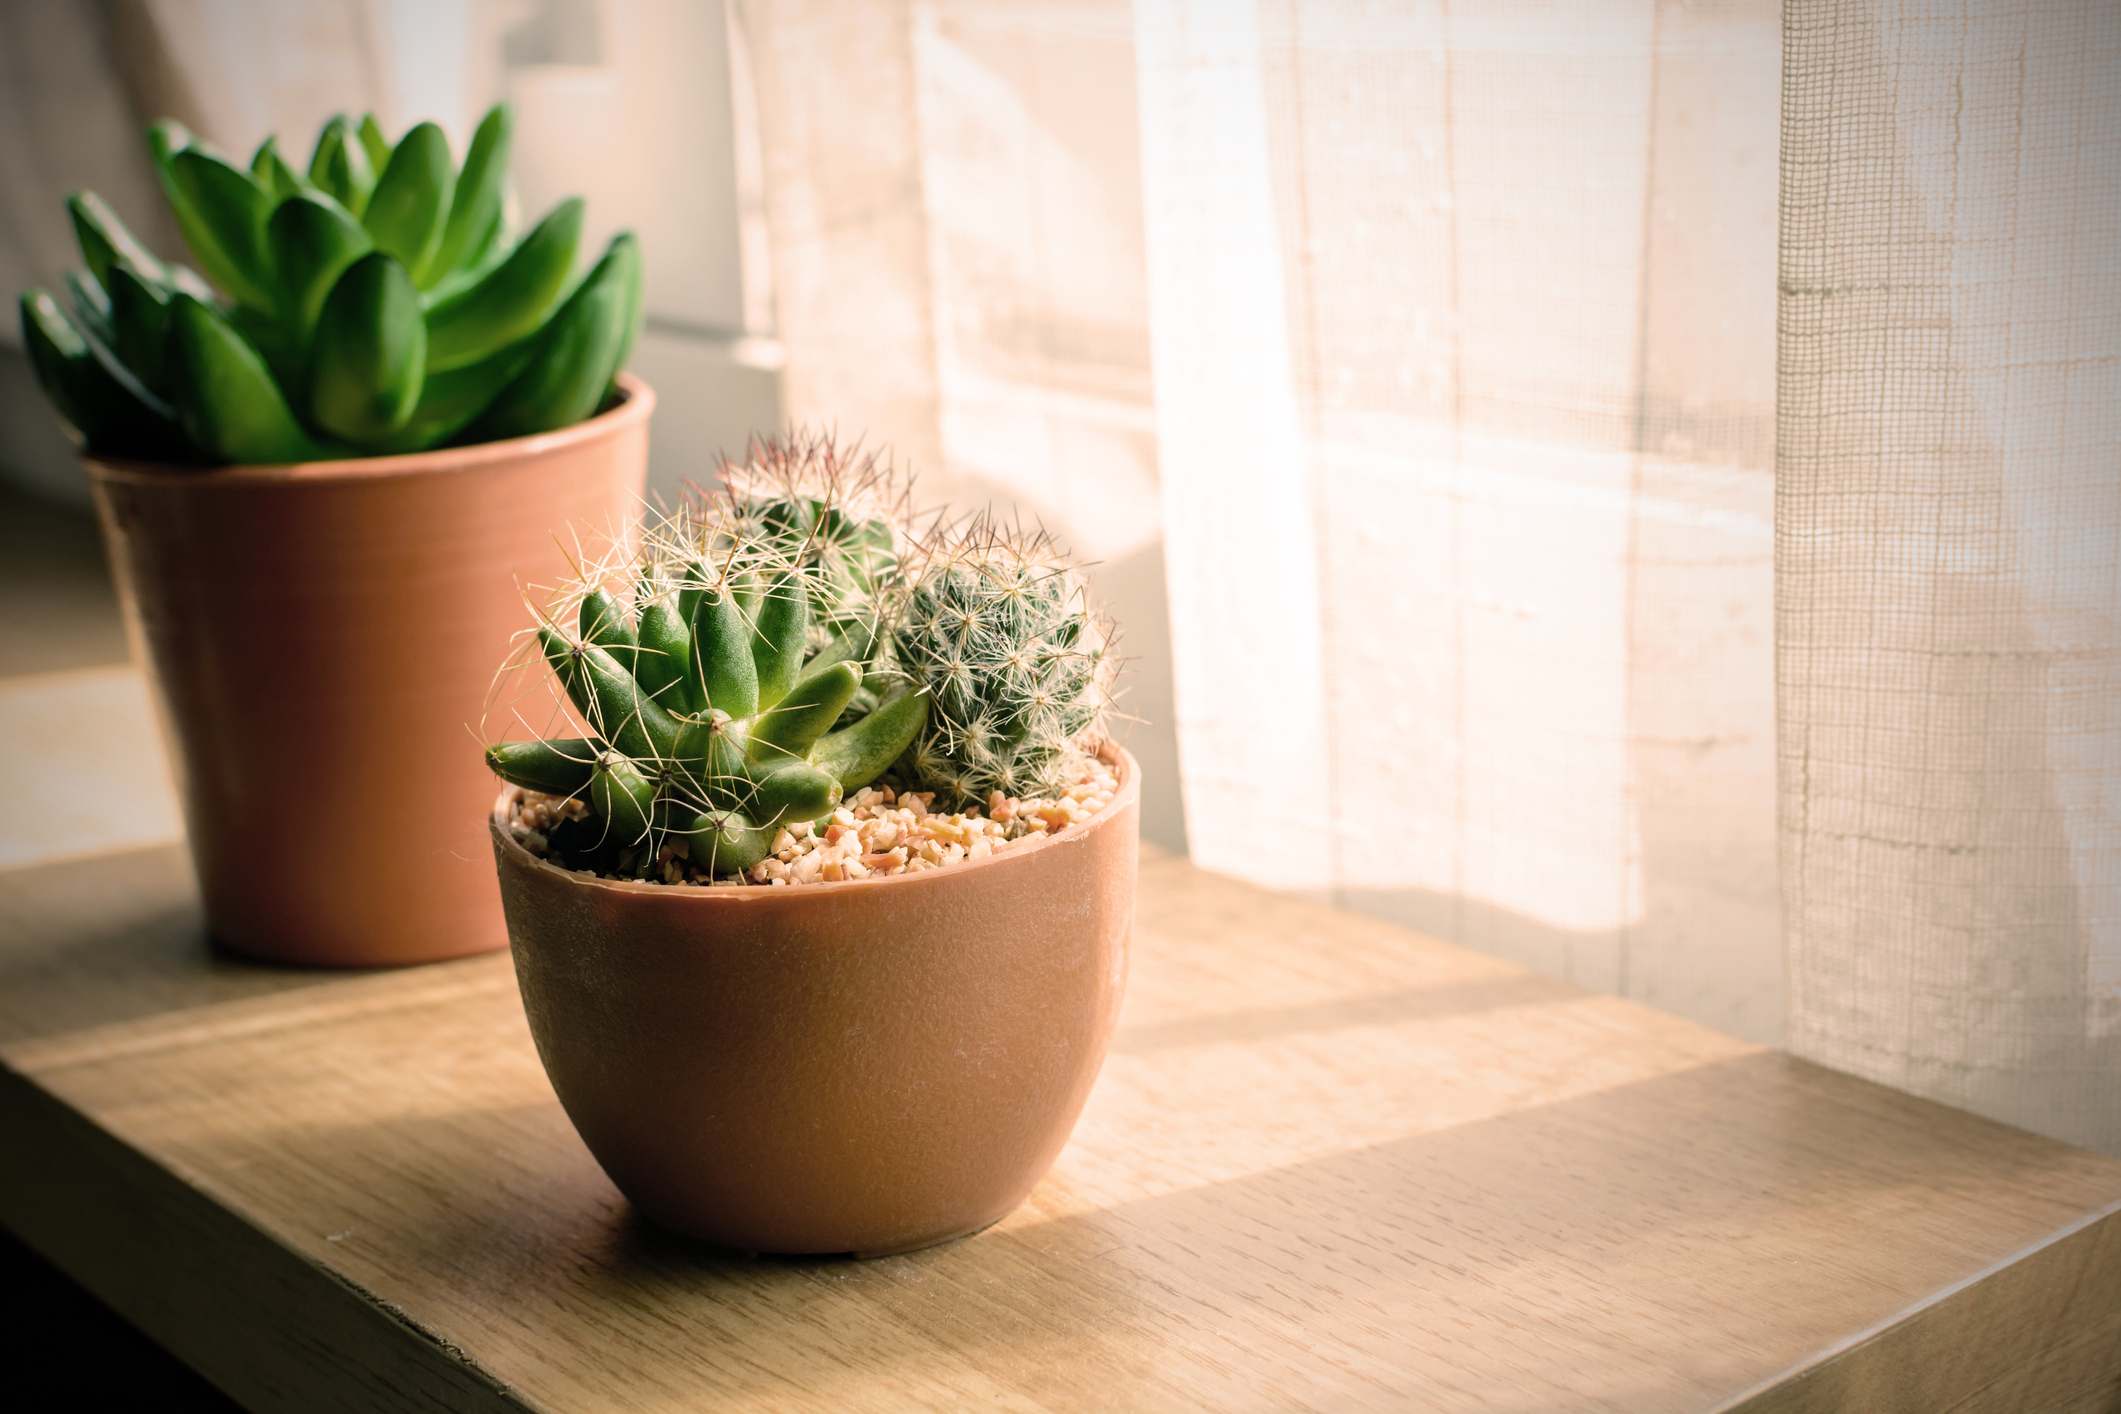  How to save your cactus if its turning yellow or brown